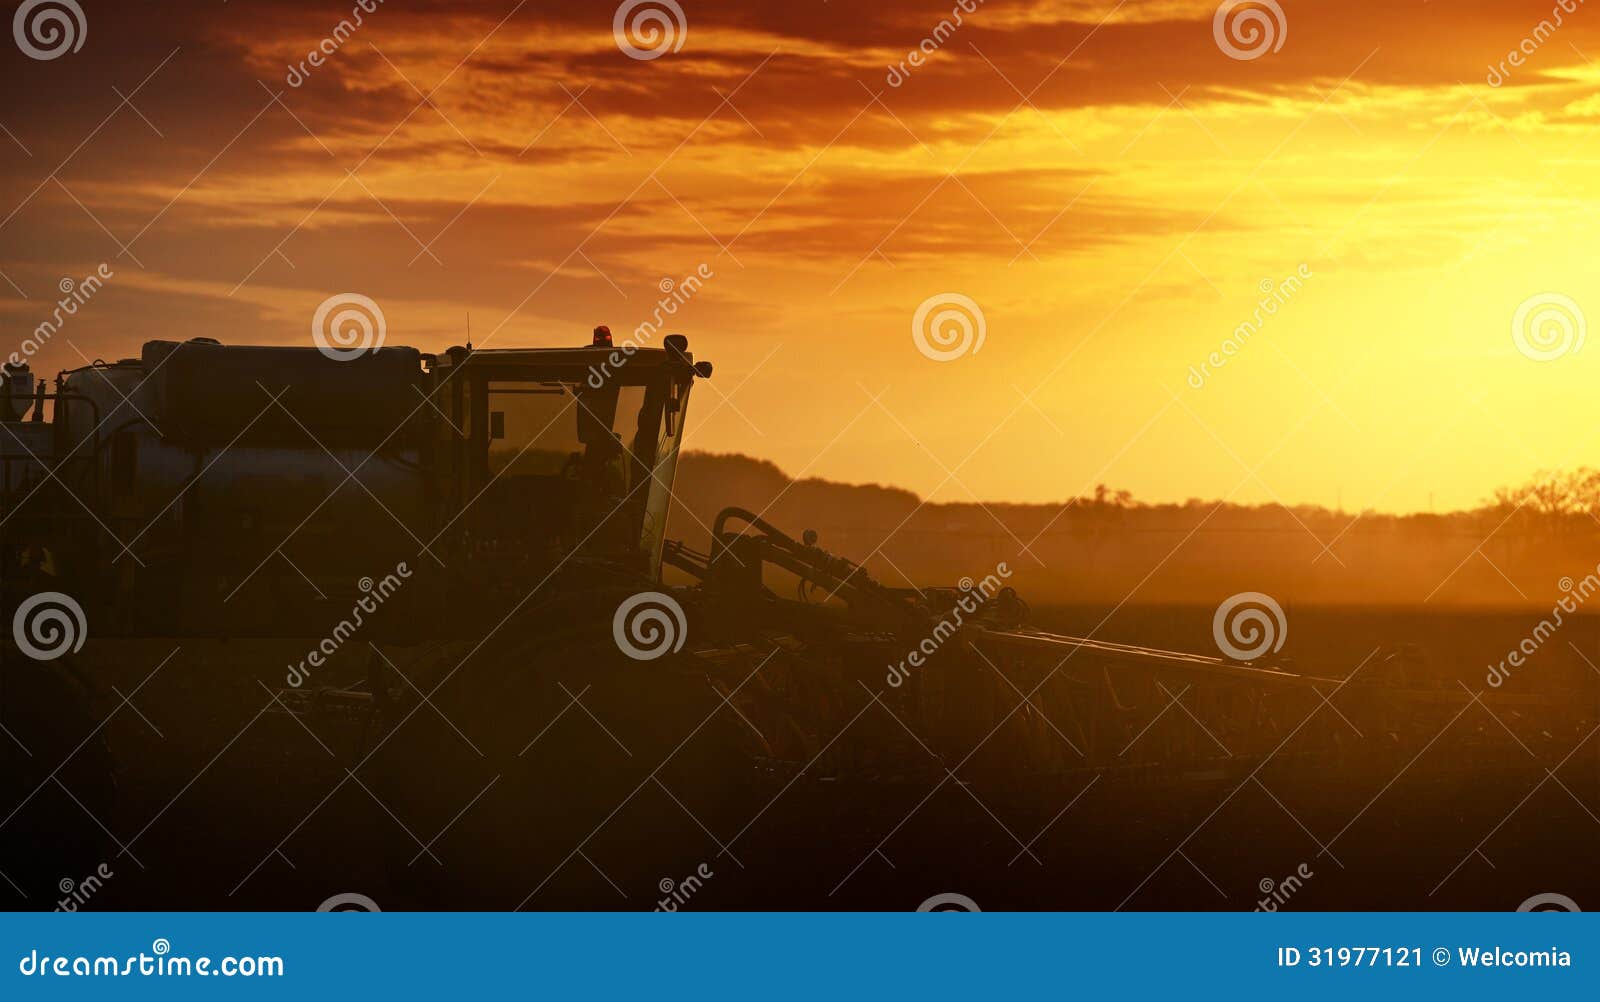 cultivating in sunset